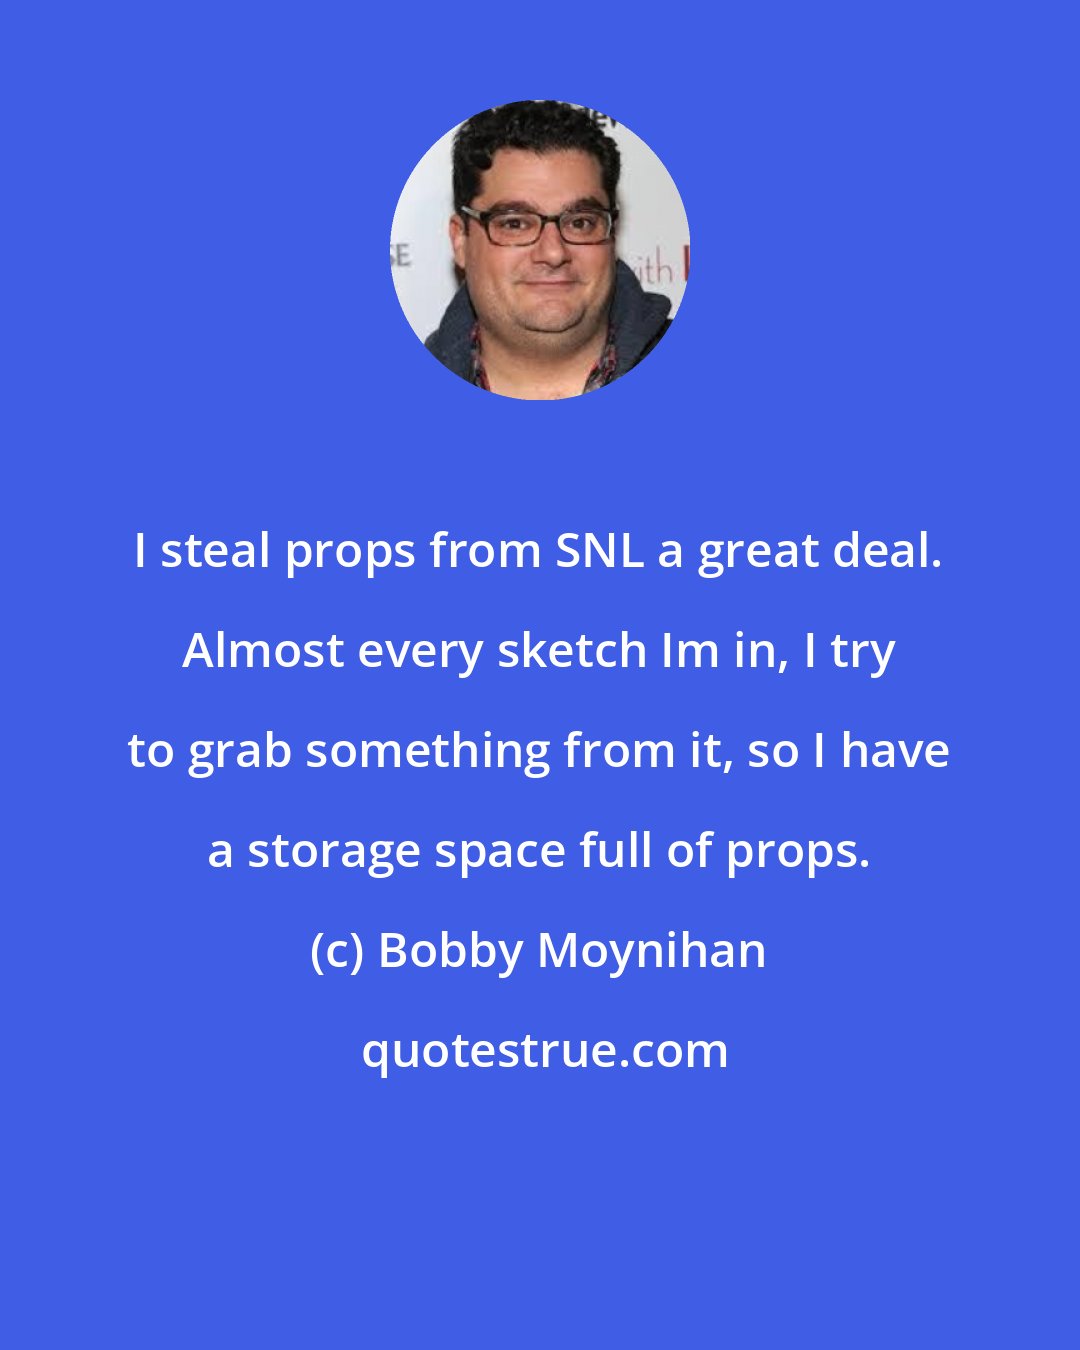 Bobby Moynihan: I steal props from SNL a great deal. Almost every sketch Im in, I try to grab something from it, so I have a storage space full of props.